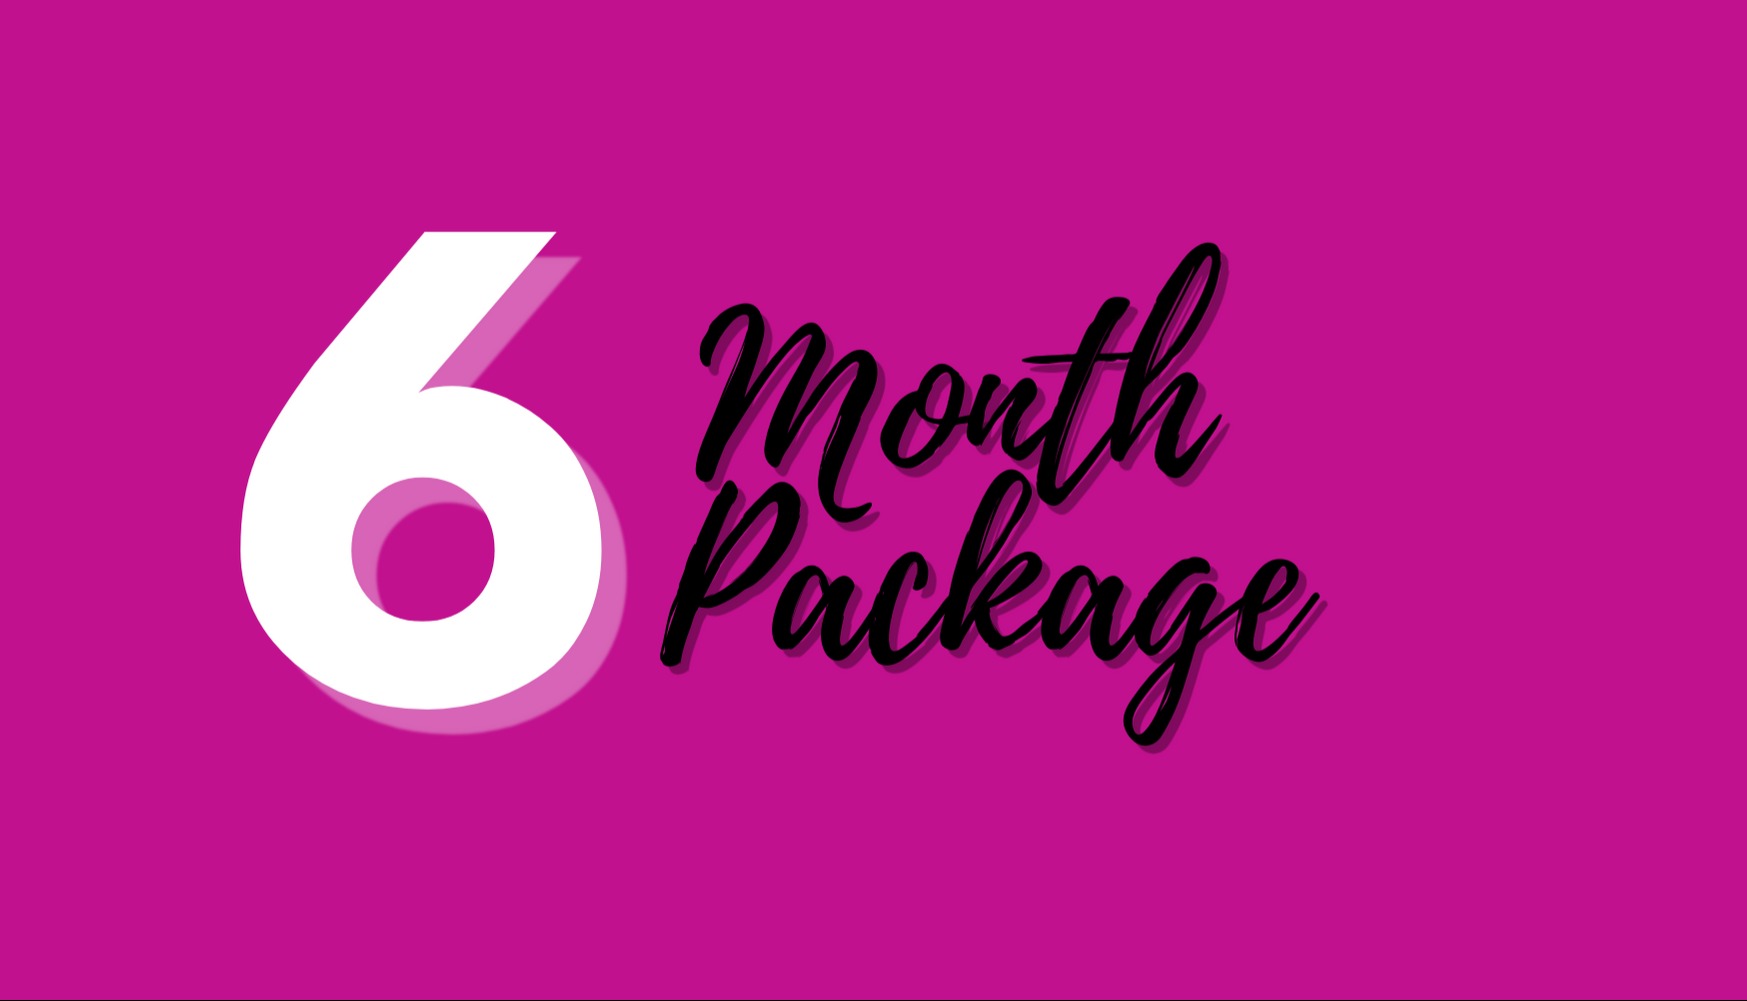 6 Month Studio Package